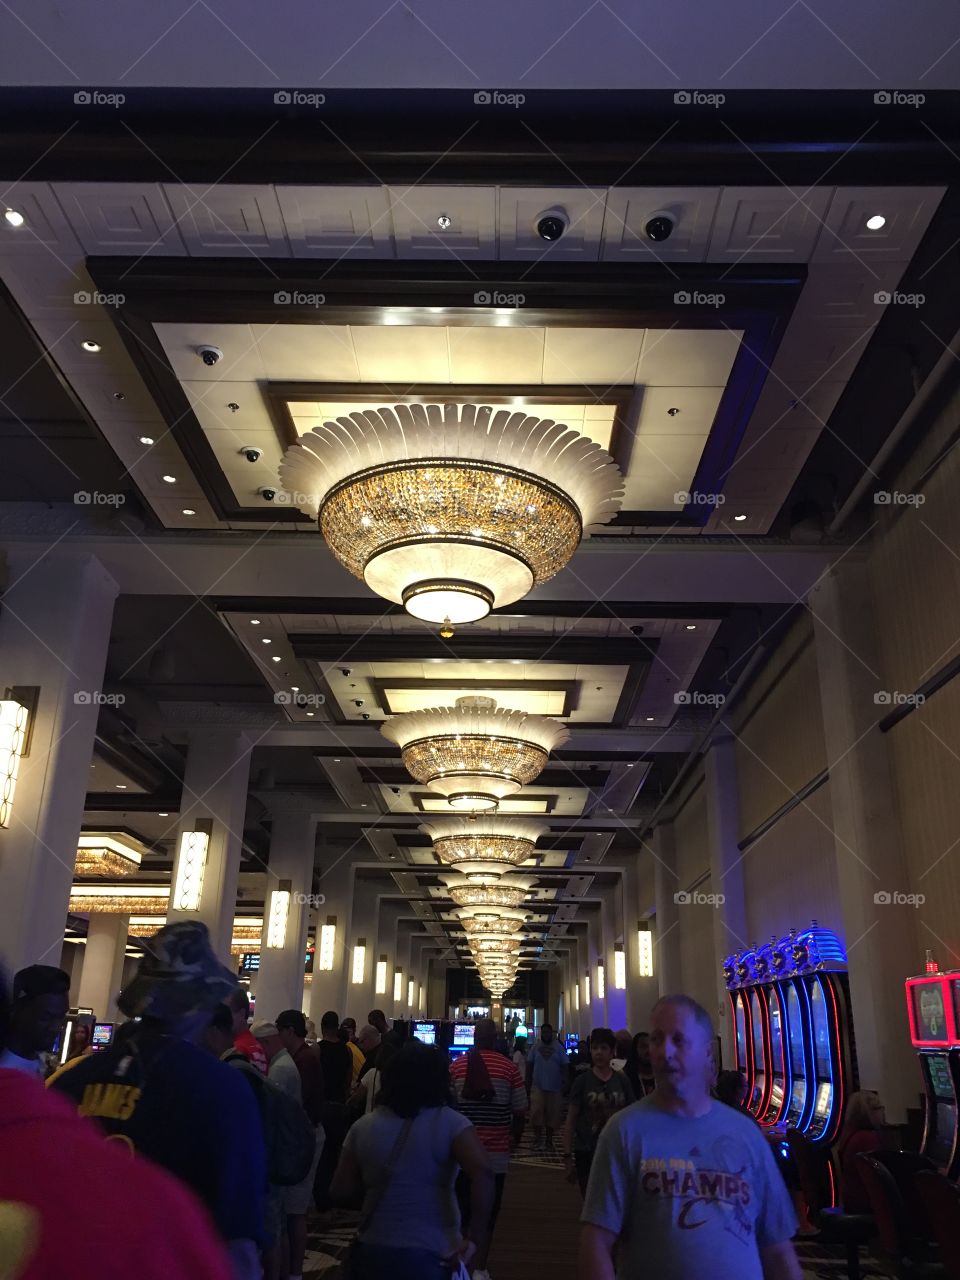 Inside the Jack casino in Cleveland.  Look at those chandeliers.  